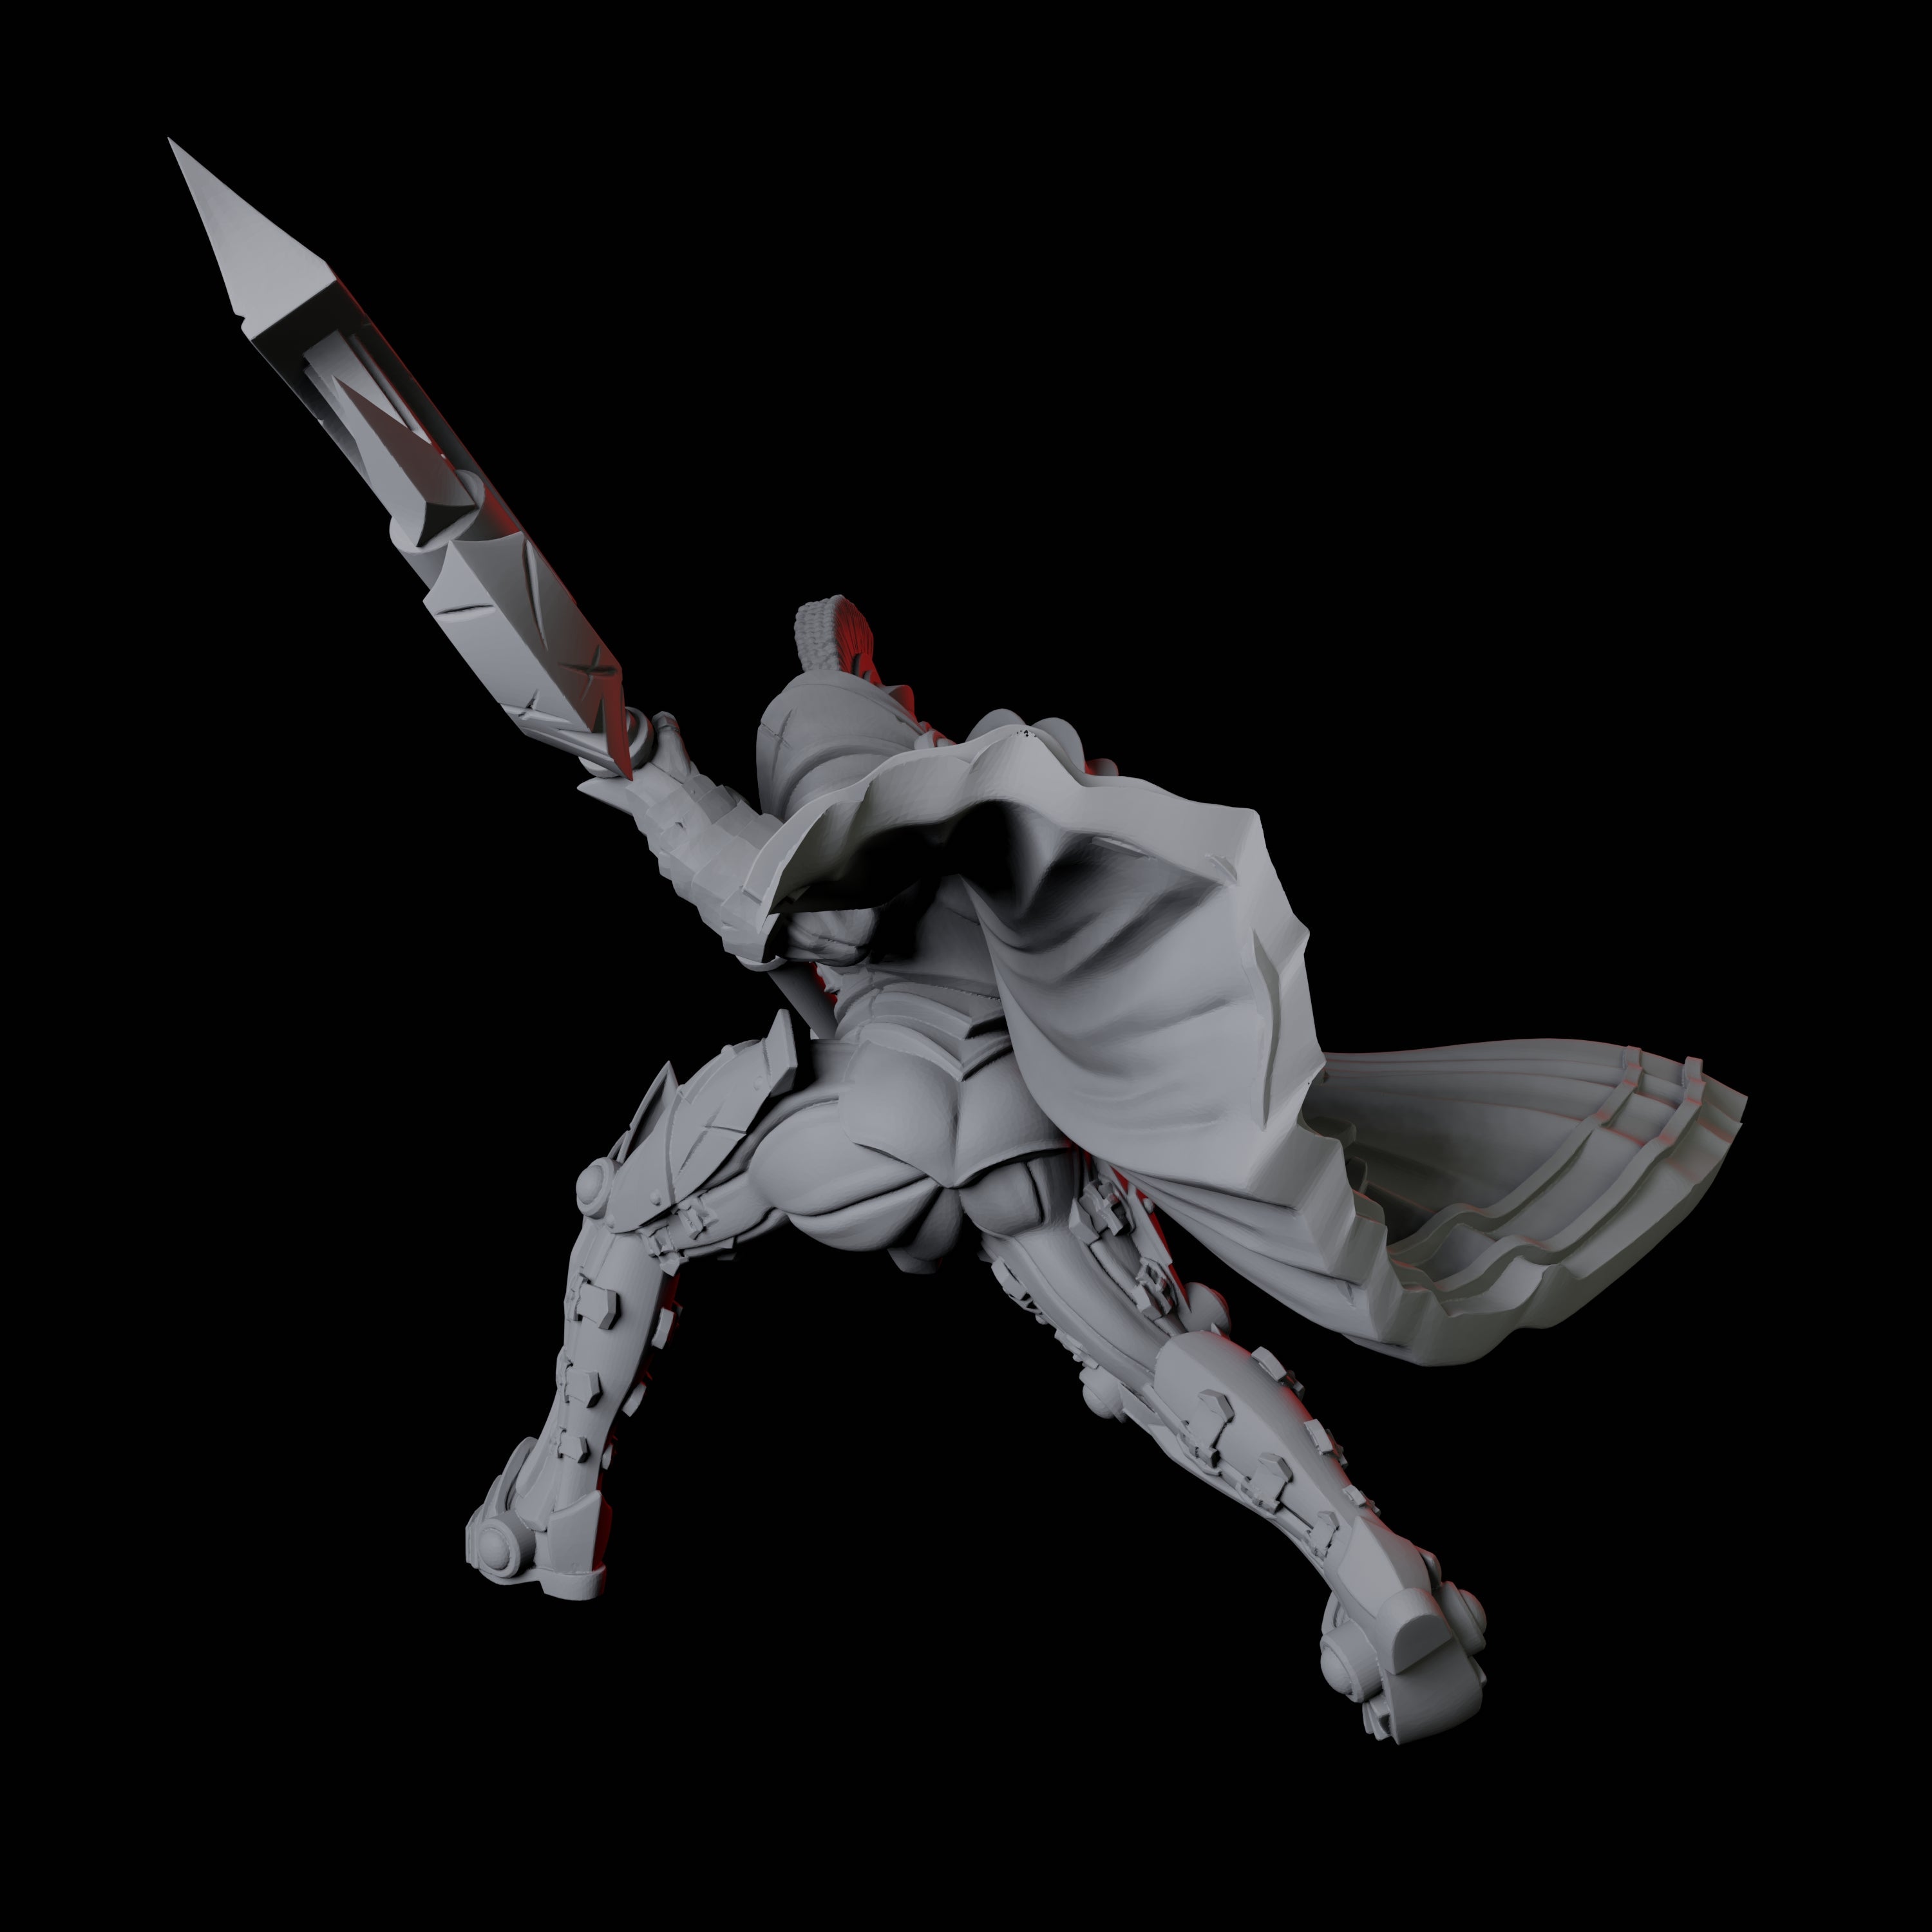 Axe-Wielding Knight B Miniature for Dungeons and Dragons, Pathfinder or other TTRPGs